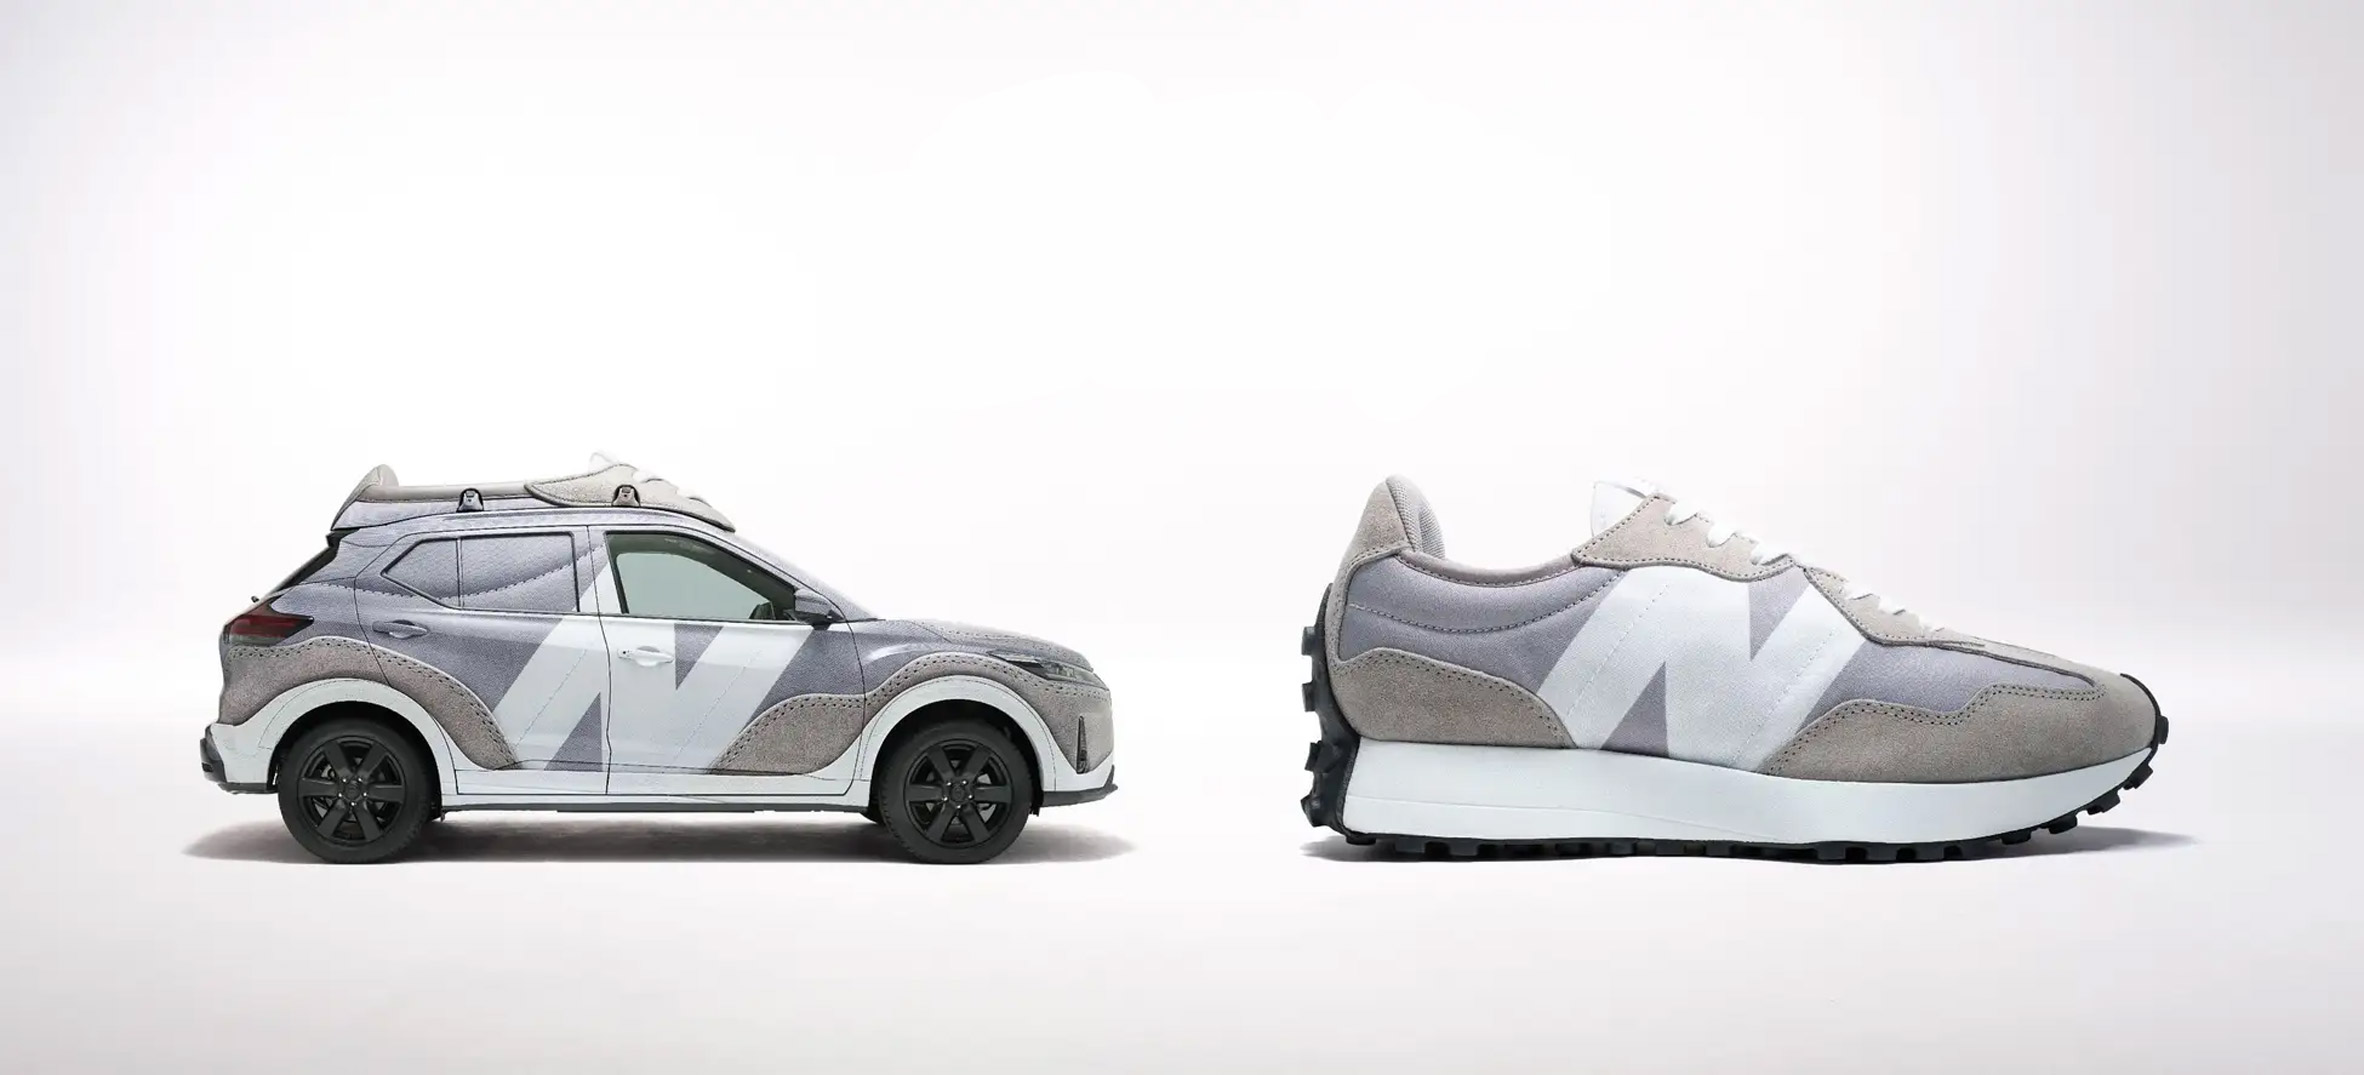 Trainer car by Nissan and New Balance